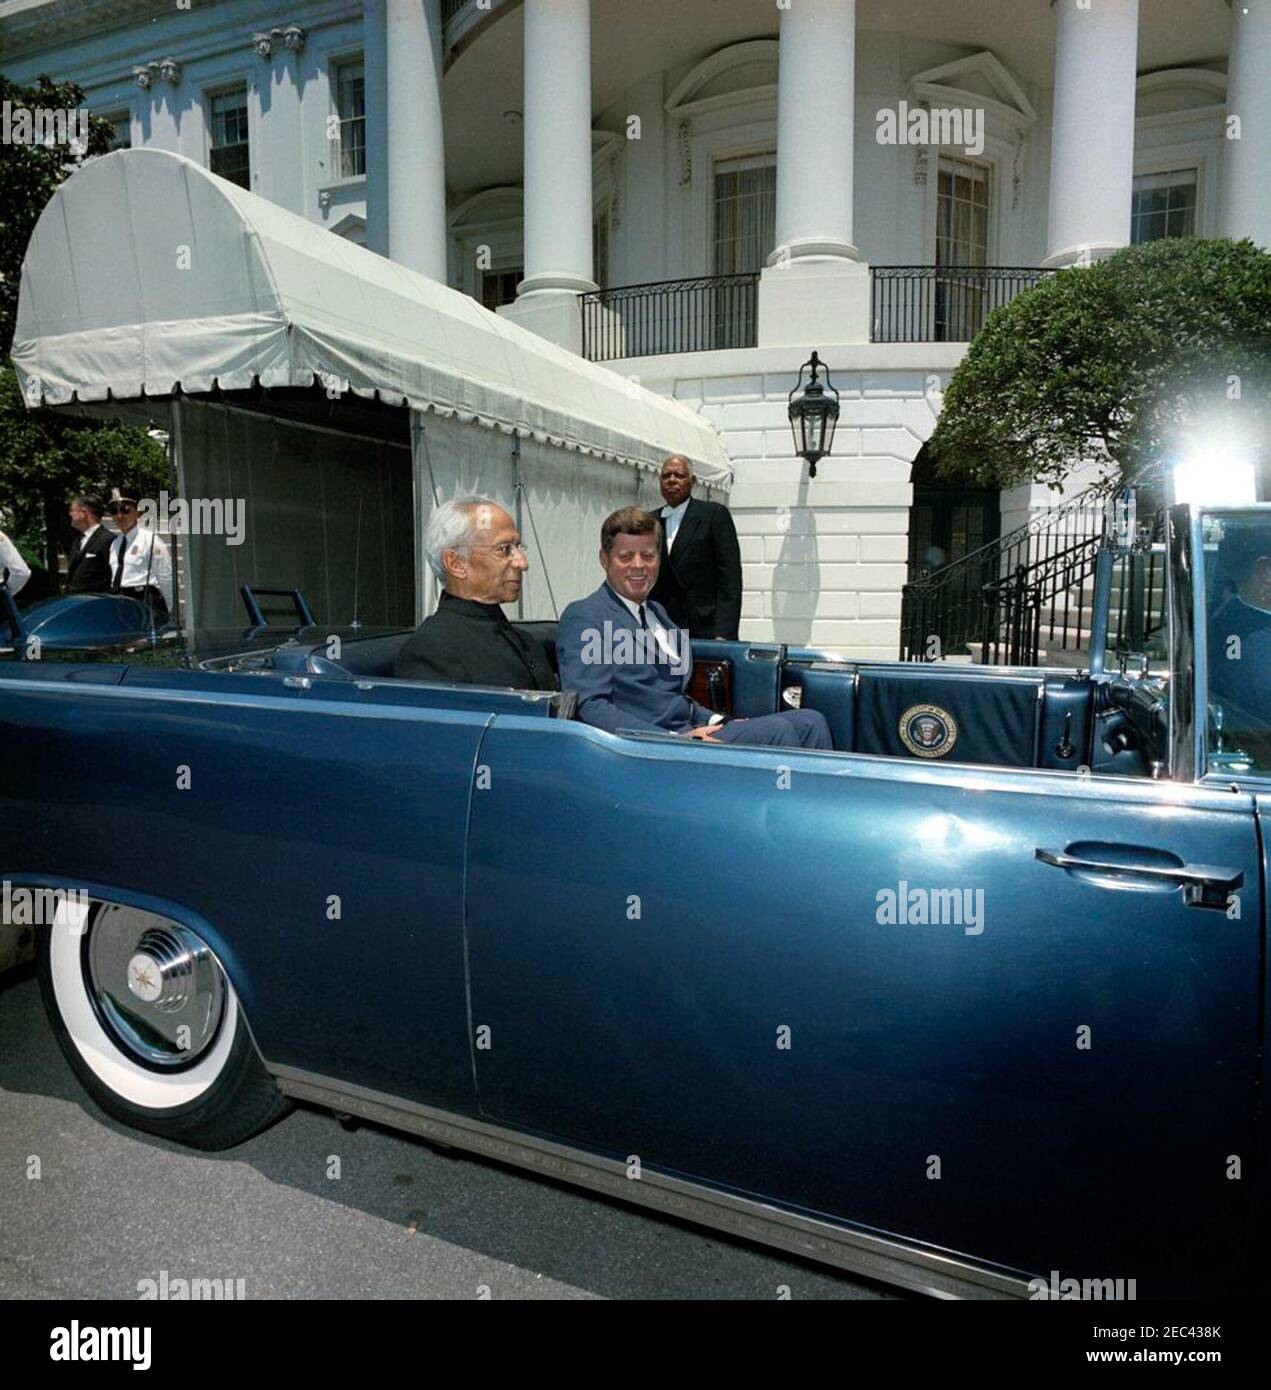 Parade in honor of Dr. Sarvepalli Radhakrishnan, President of India, 12:35PM. President John F. Kennedy and President of India, Dr. Sarvepalli Radhakrishnan, sit in the back seat of the presidential limousine (Lincoln-Mercury Continental convertible) prior to a parade in honor of President Radhakrishnan. Special Assistant to President Kennedy, John J. McNally (head turned), stands at far left in background. South Lawn driveway, White House, Washington, D.C. Stock Photo